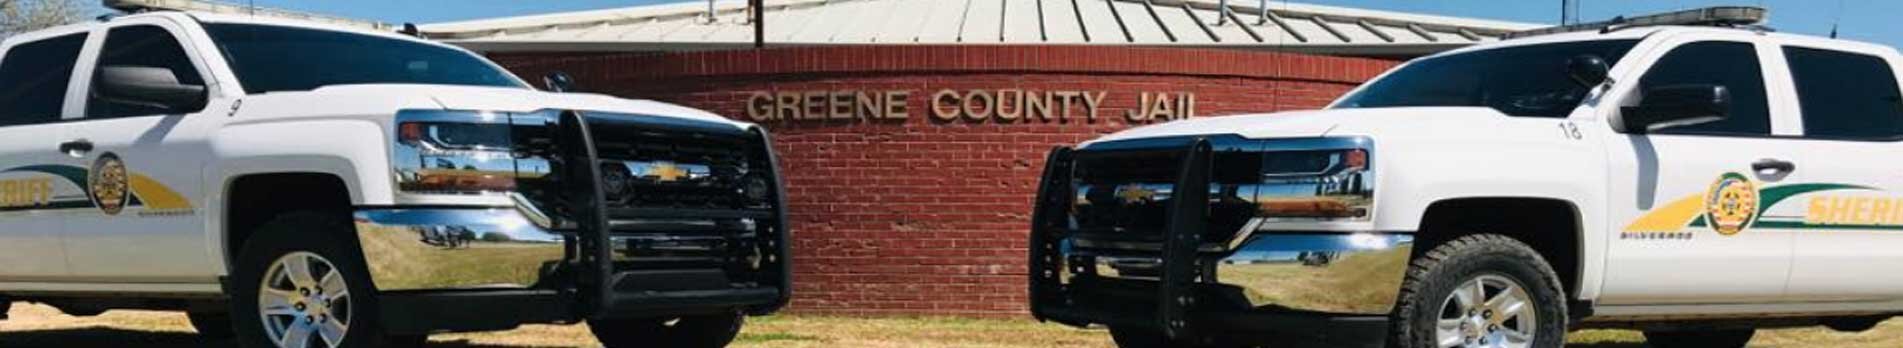 Greene County Police trucks in front of the Greene County Jail.